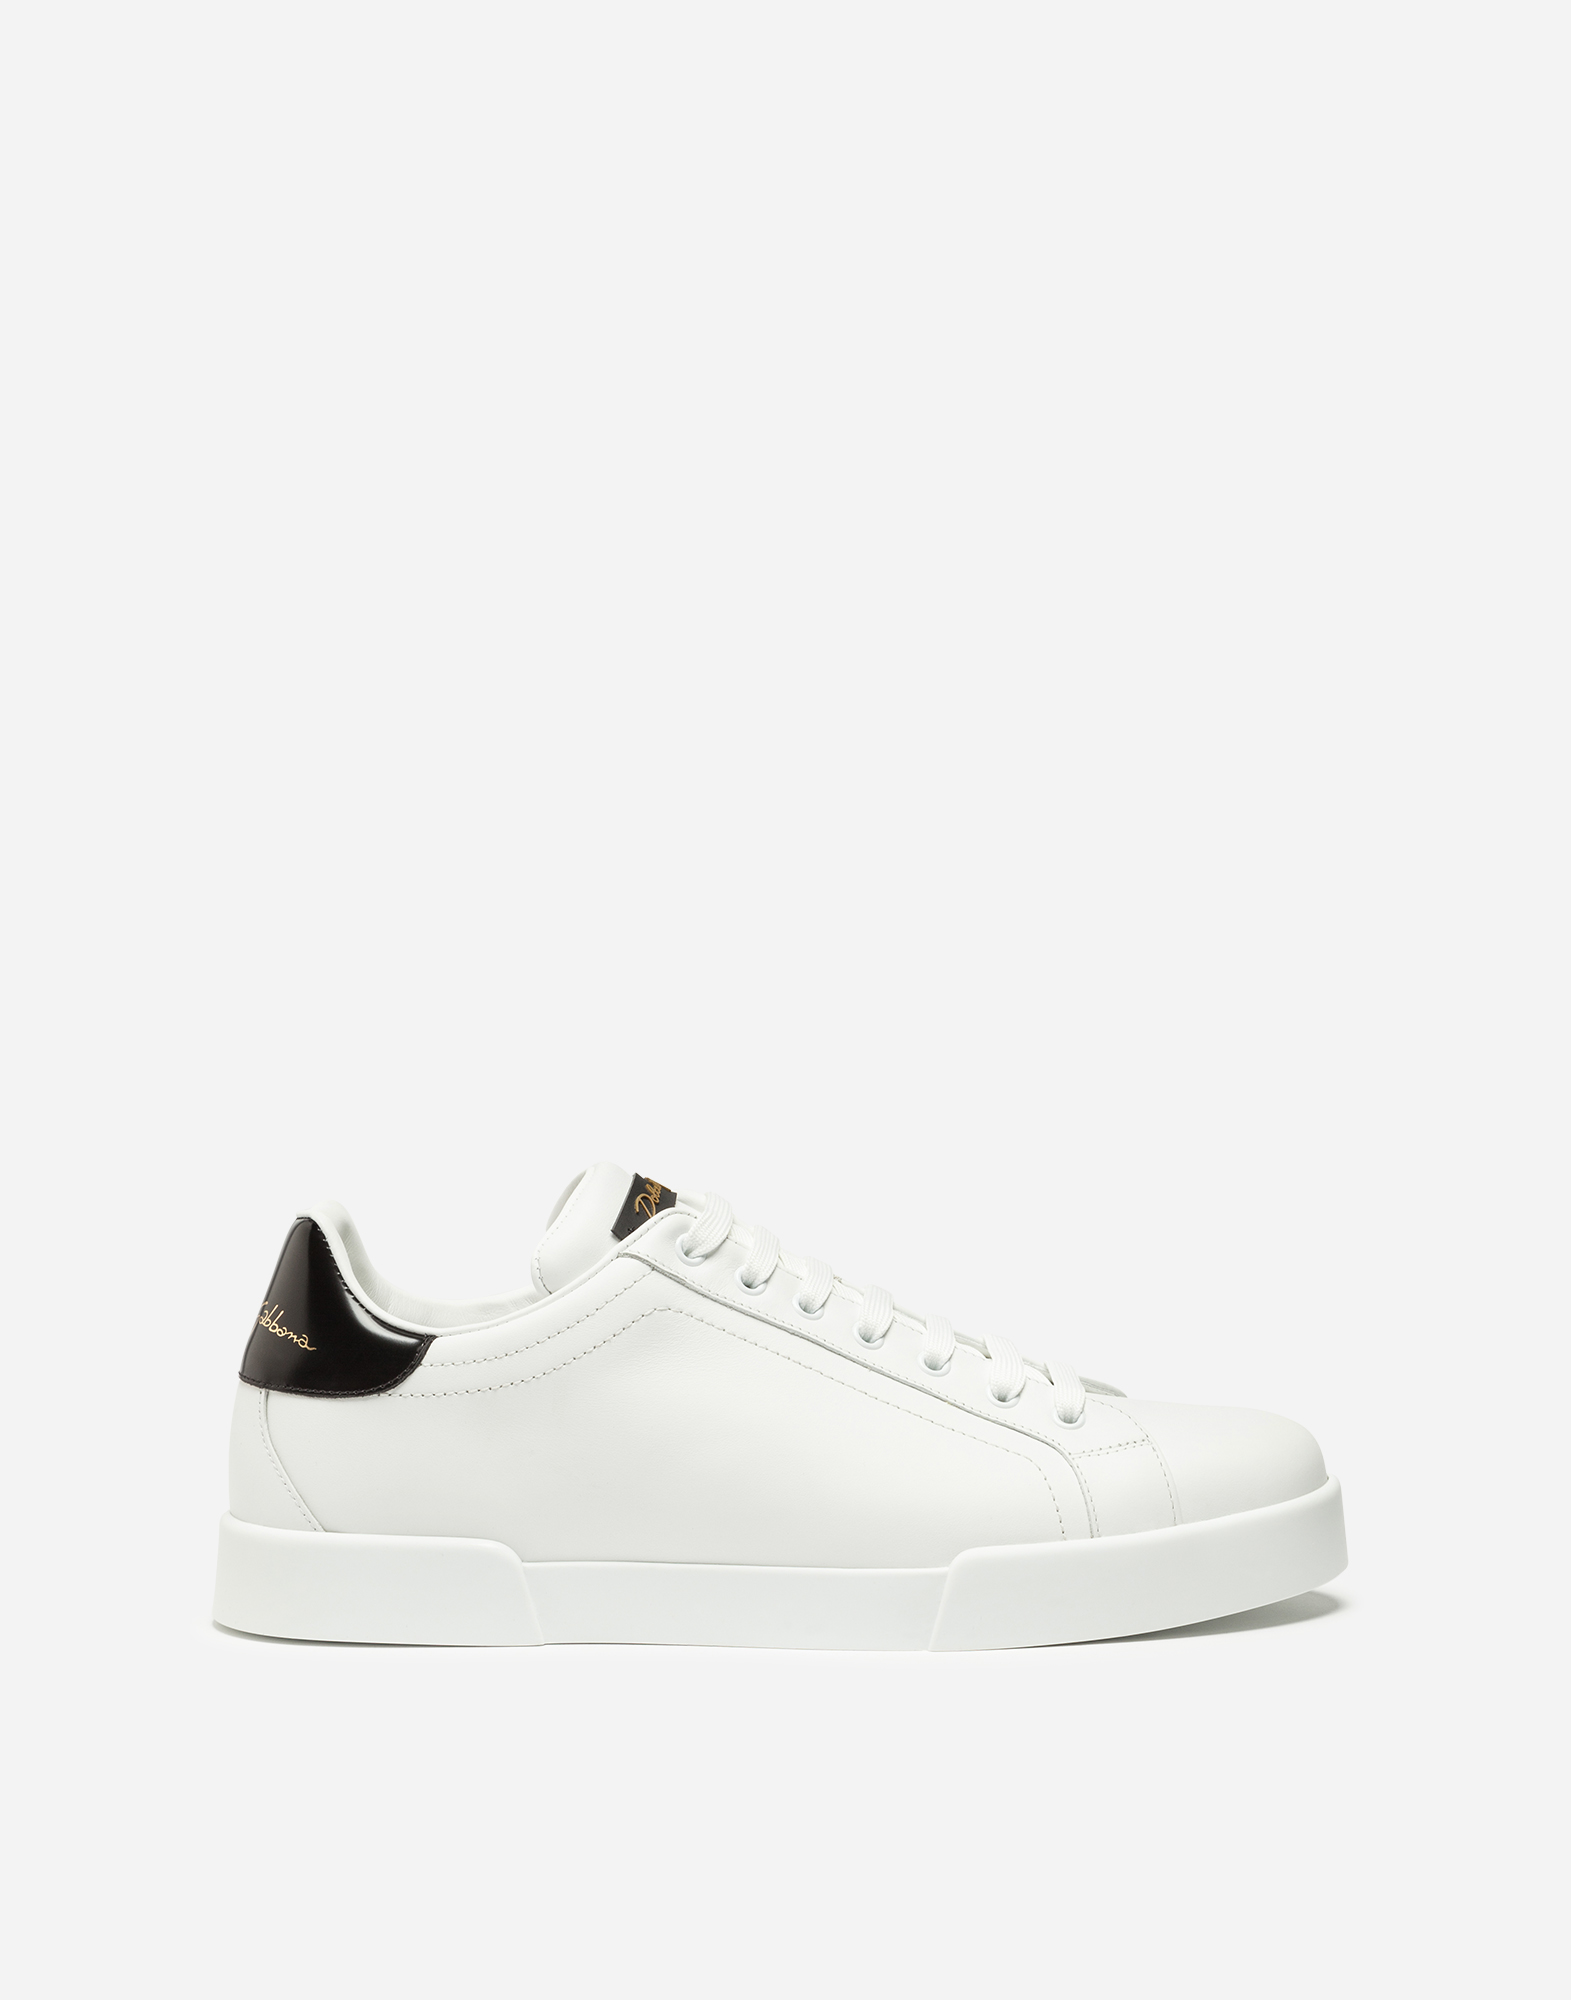 dolce & gabbana men's leather sneakers shoes